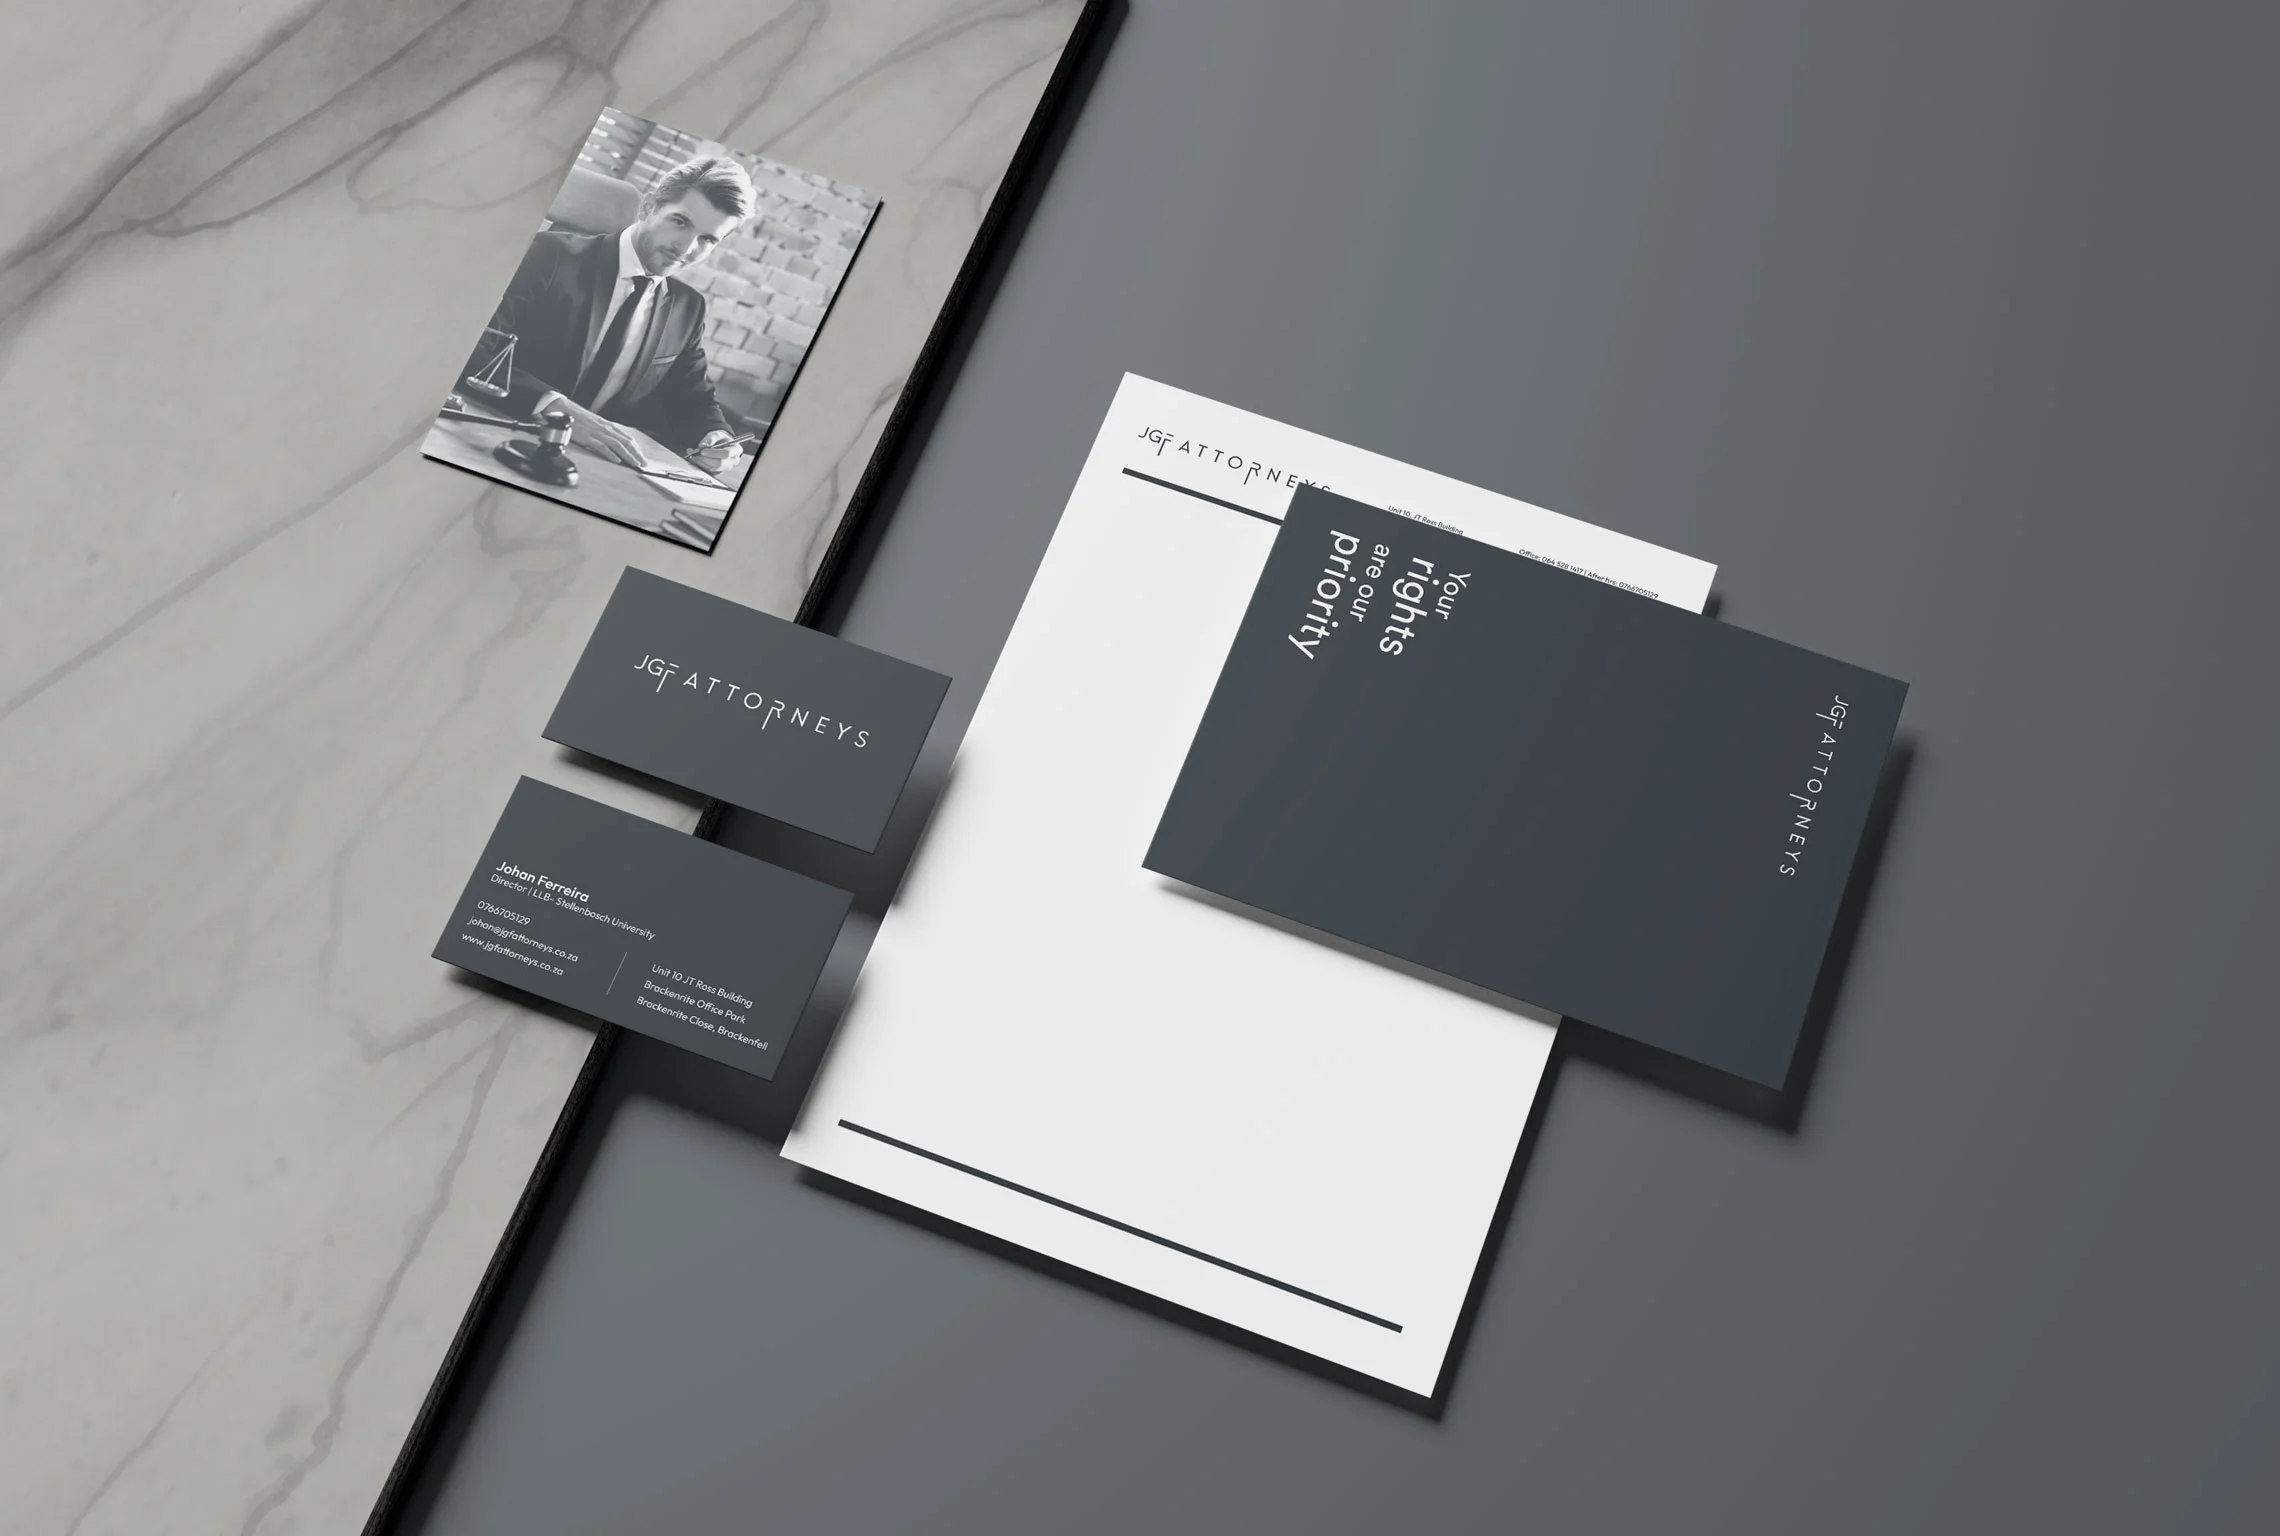 Branding packages for startups South Africa: Our branding packages for startups include the essential elements of branding that are necessary to create a strong brand identity for newly founded businesses.